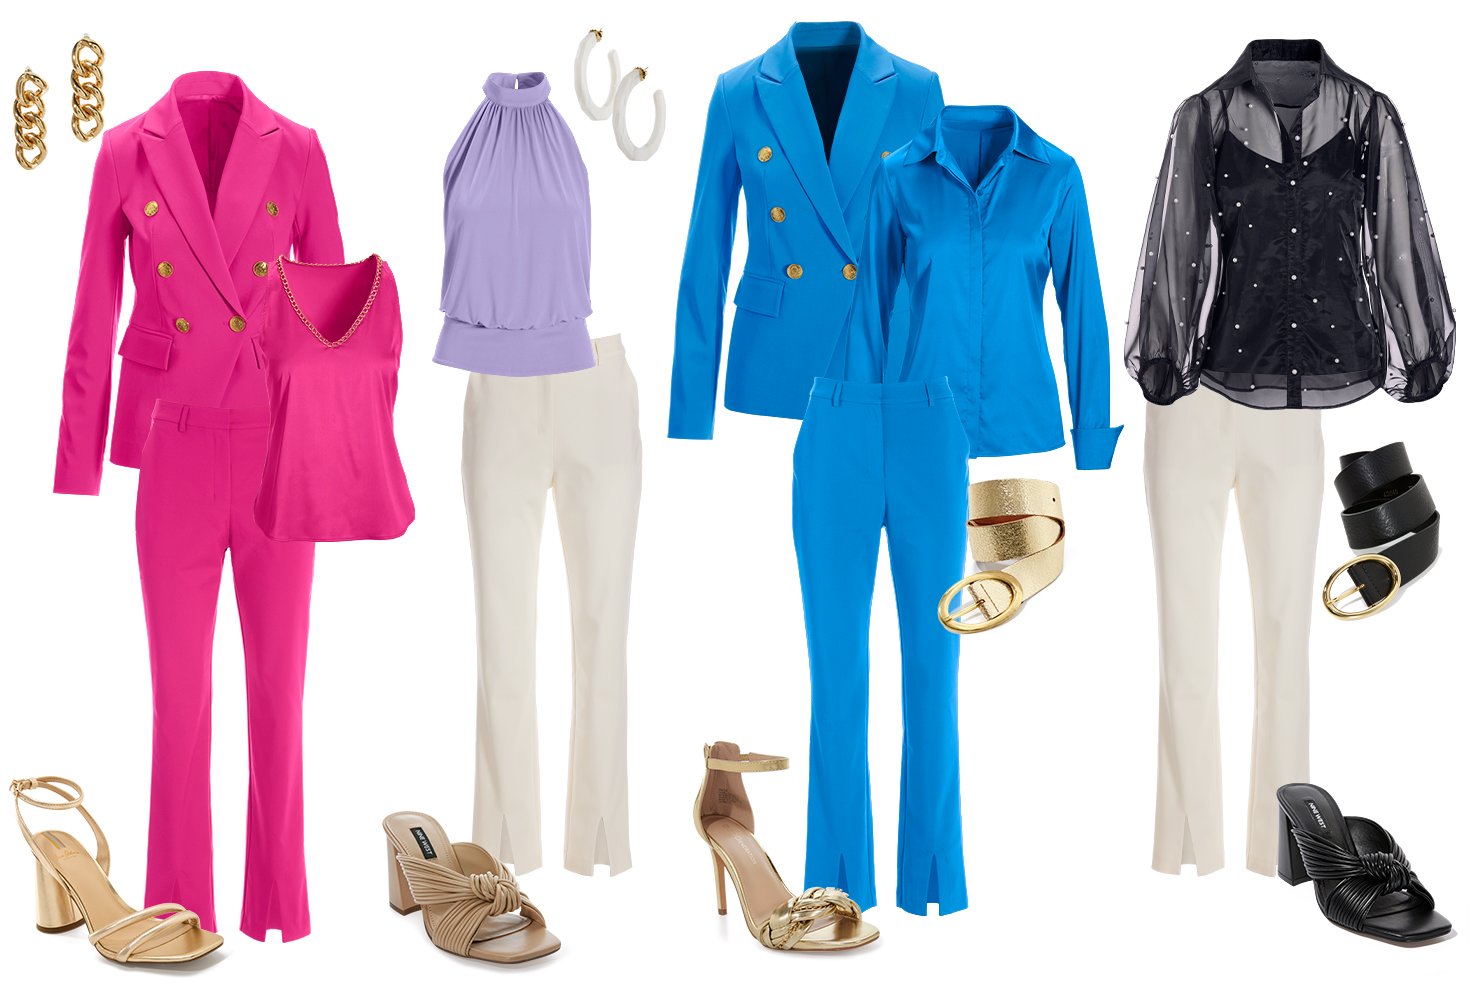 Outfits from left to right: hot pink blazer with matching trousers and gold chain embellished sleeveless charmeuse blouse, gold chain earrings, and gold heels. Lavender sleeveless mock neck blouson top, white resin hoop earrings, white trousers, and tan knotted block heels. Blue blazer with matching trousers and button-down charmeuse blouse, gold leather belt, and gold braided heels. Black pearl embellished organza button-down top, black tank top underneath, white trousers, black leather belt, and black knotted block heels.